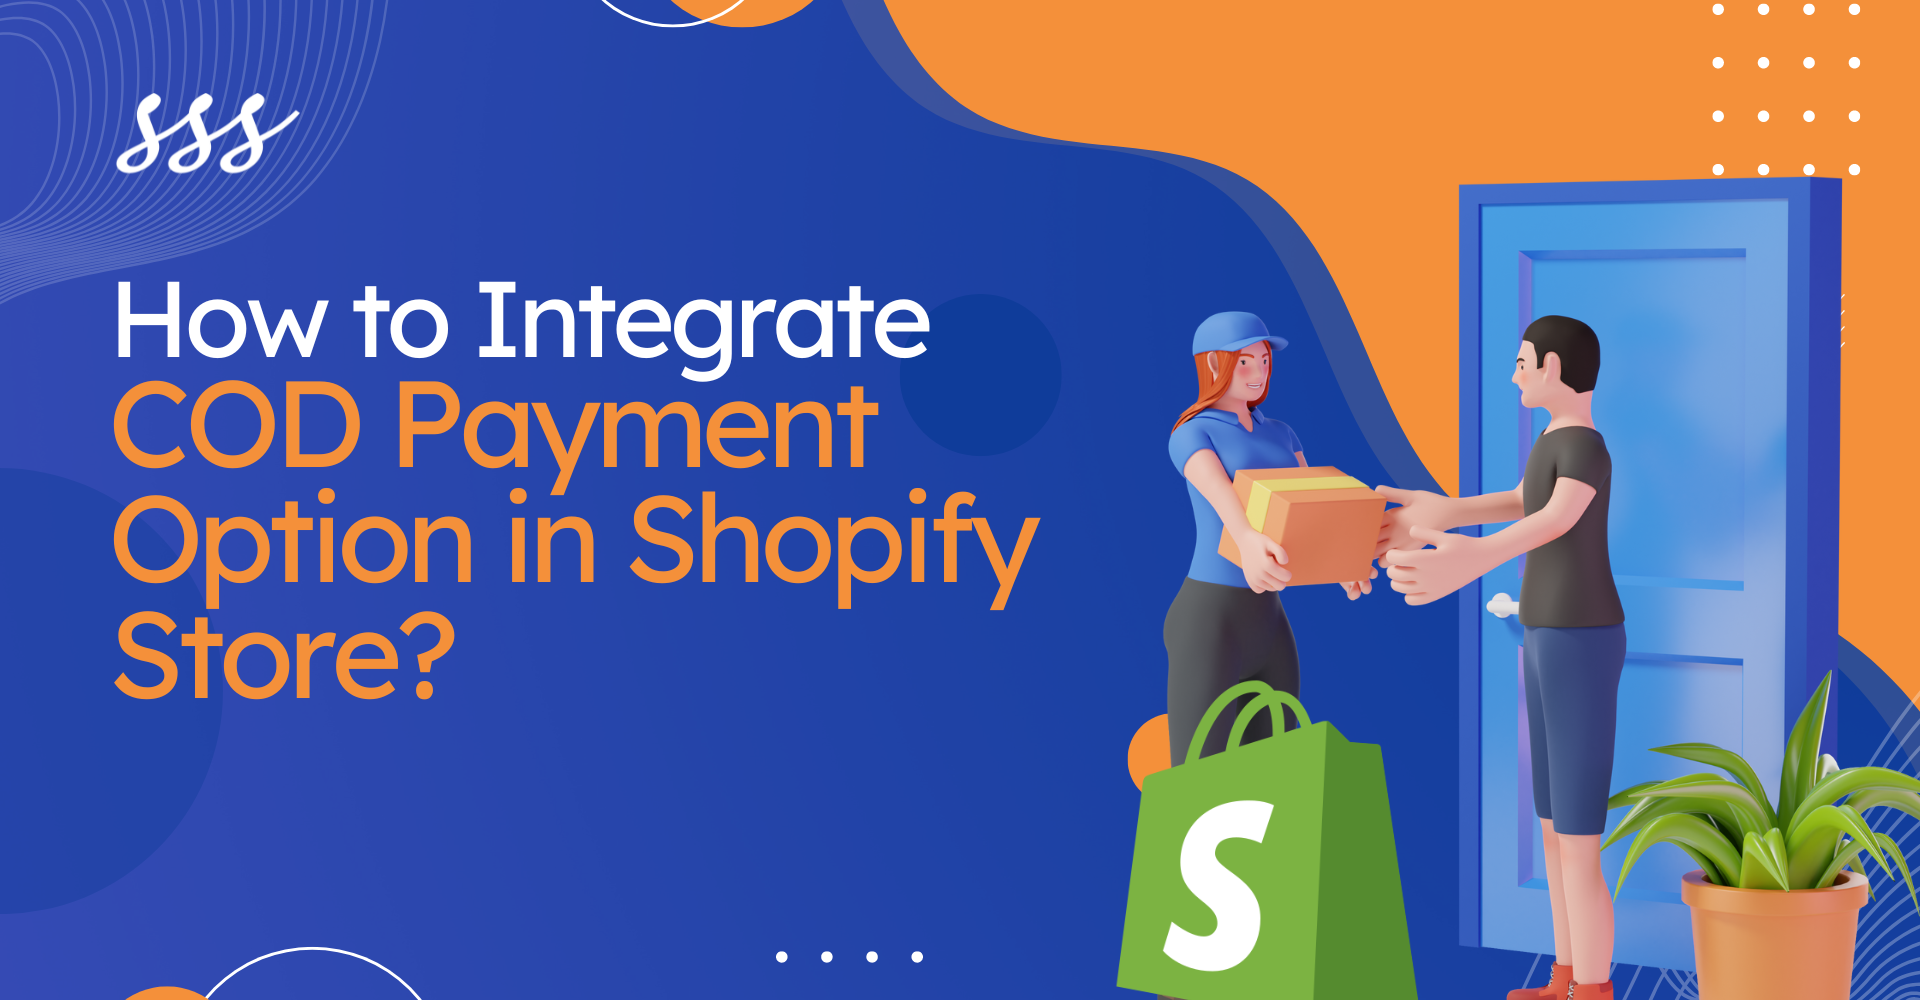 COD Payment Option in Shopify